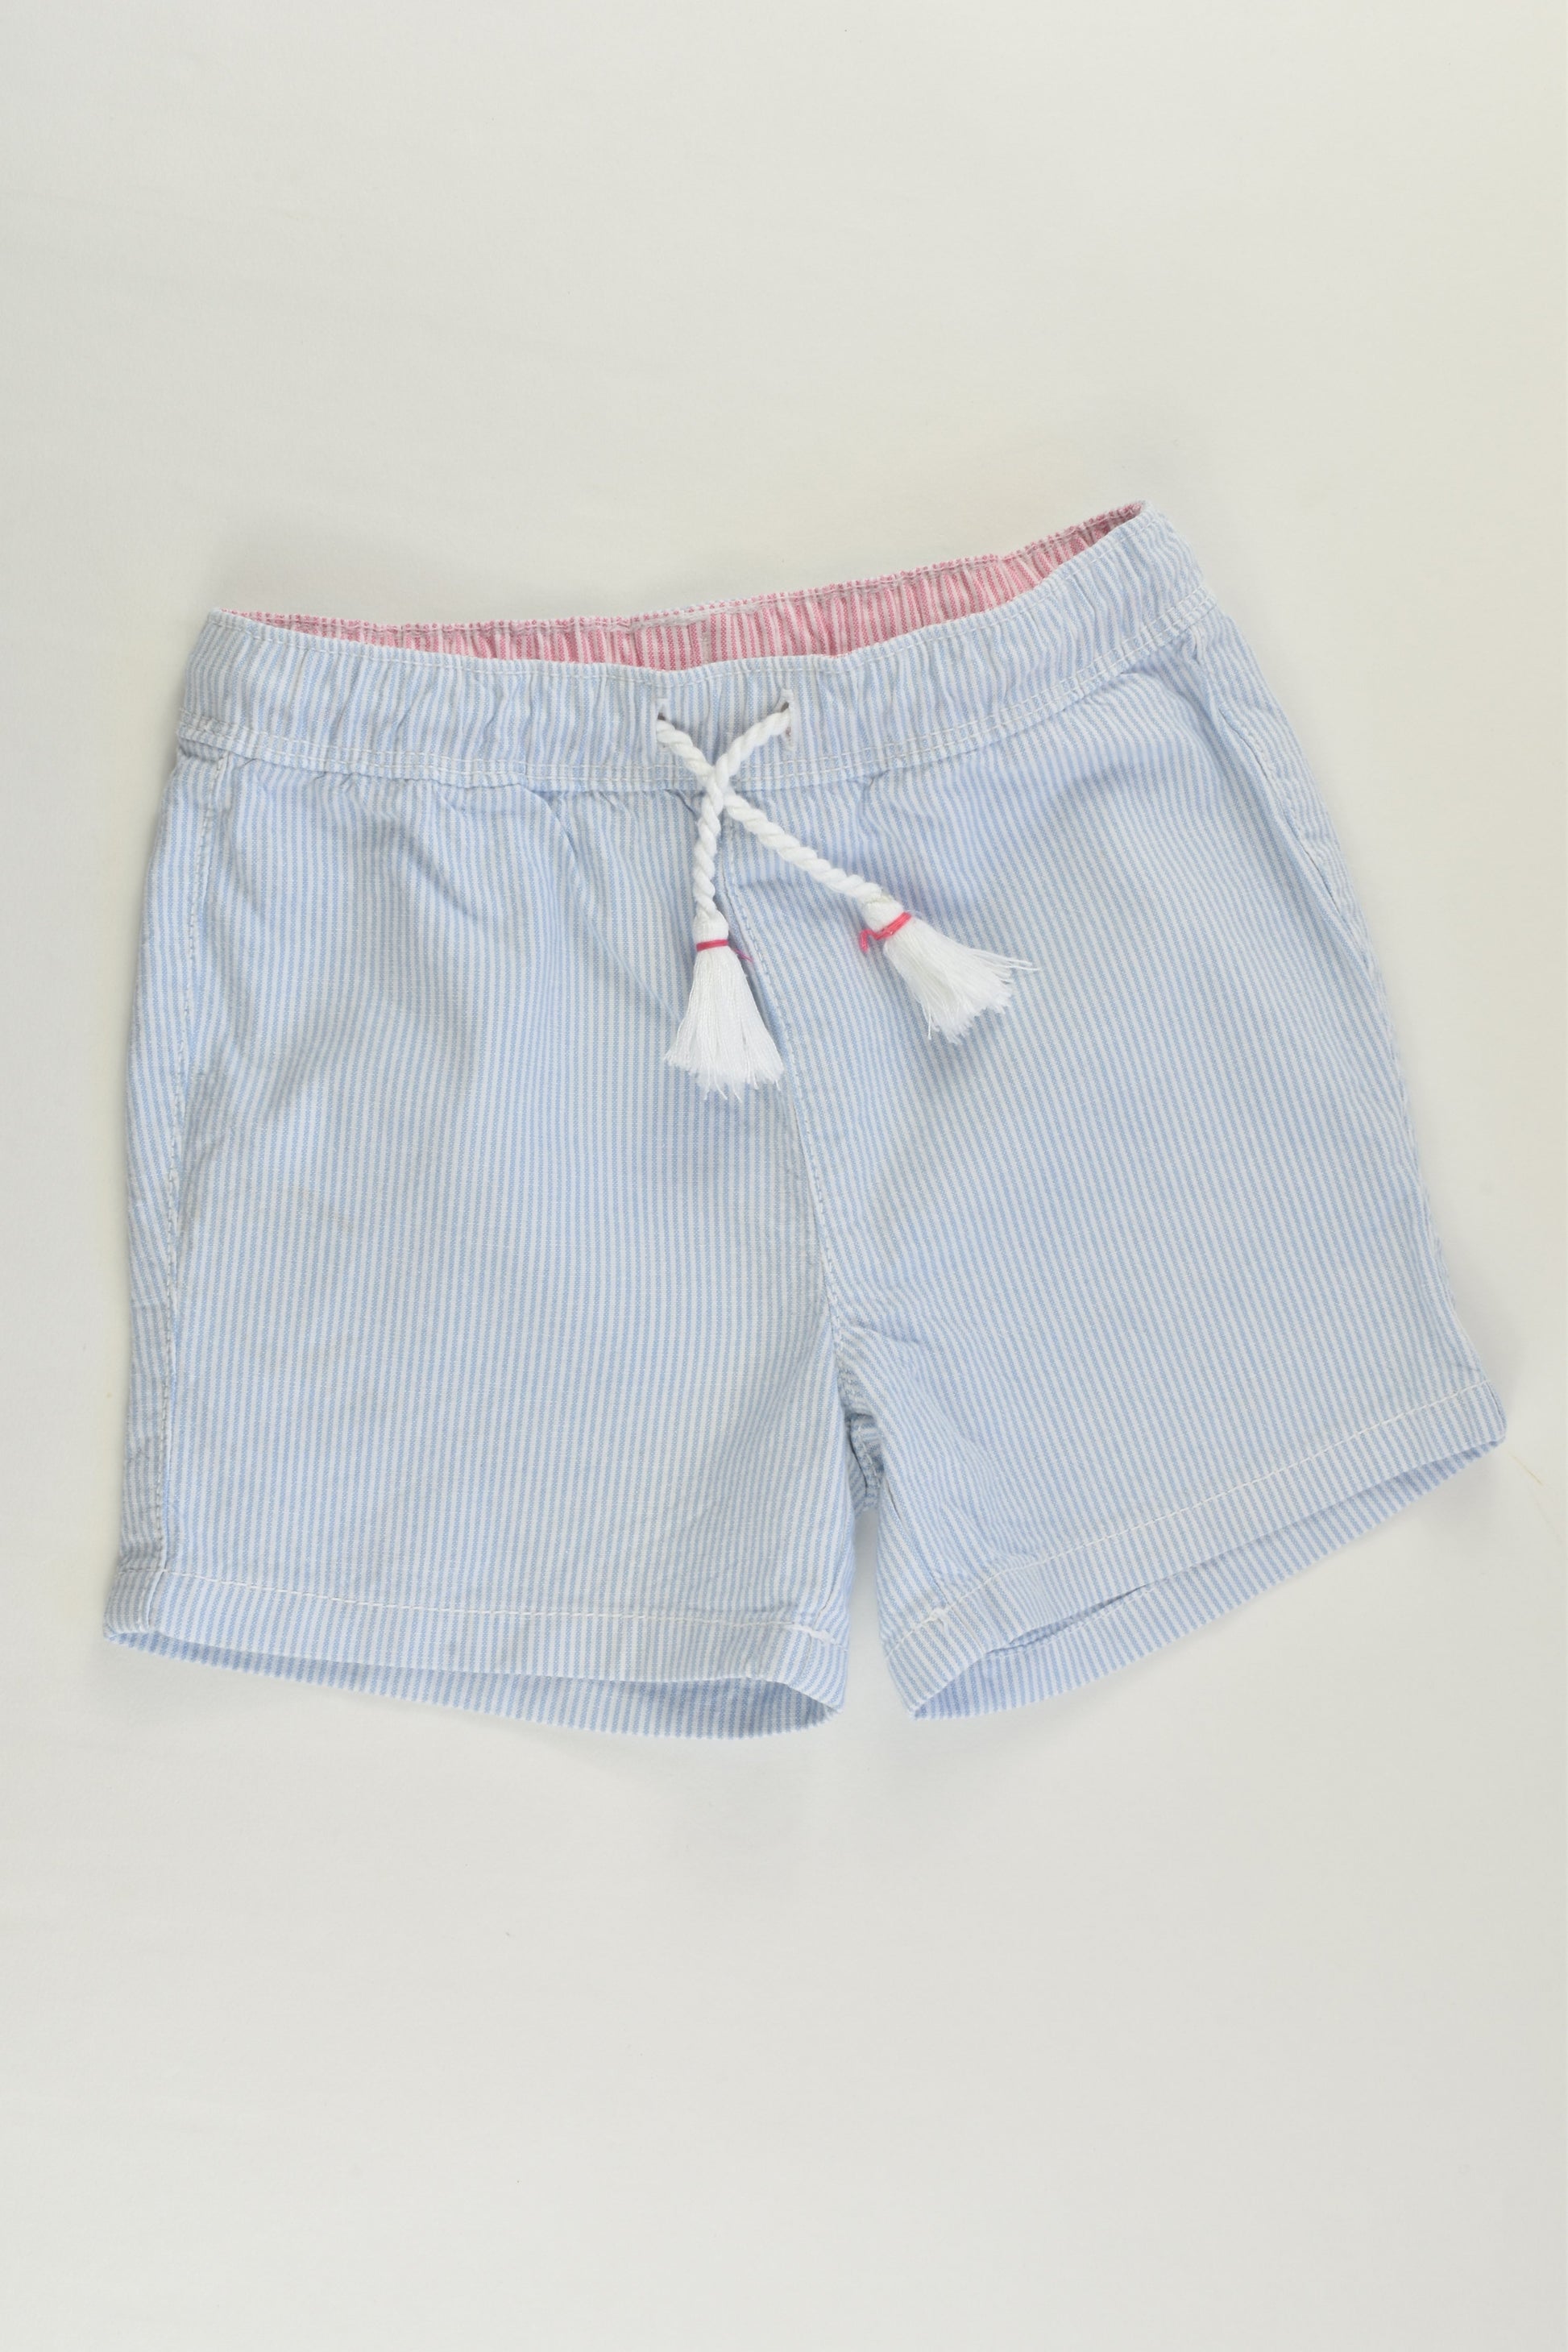 Sprout Size 2 Striped Shorts